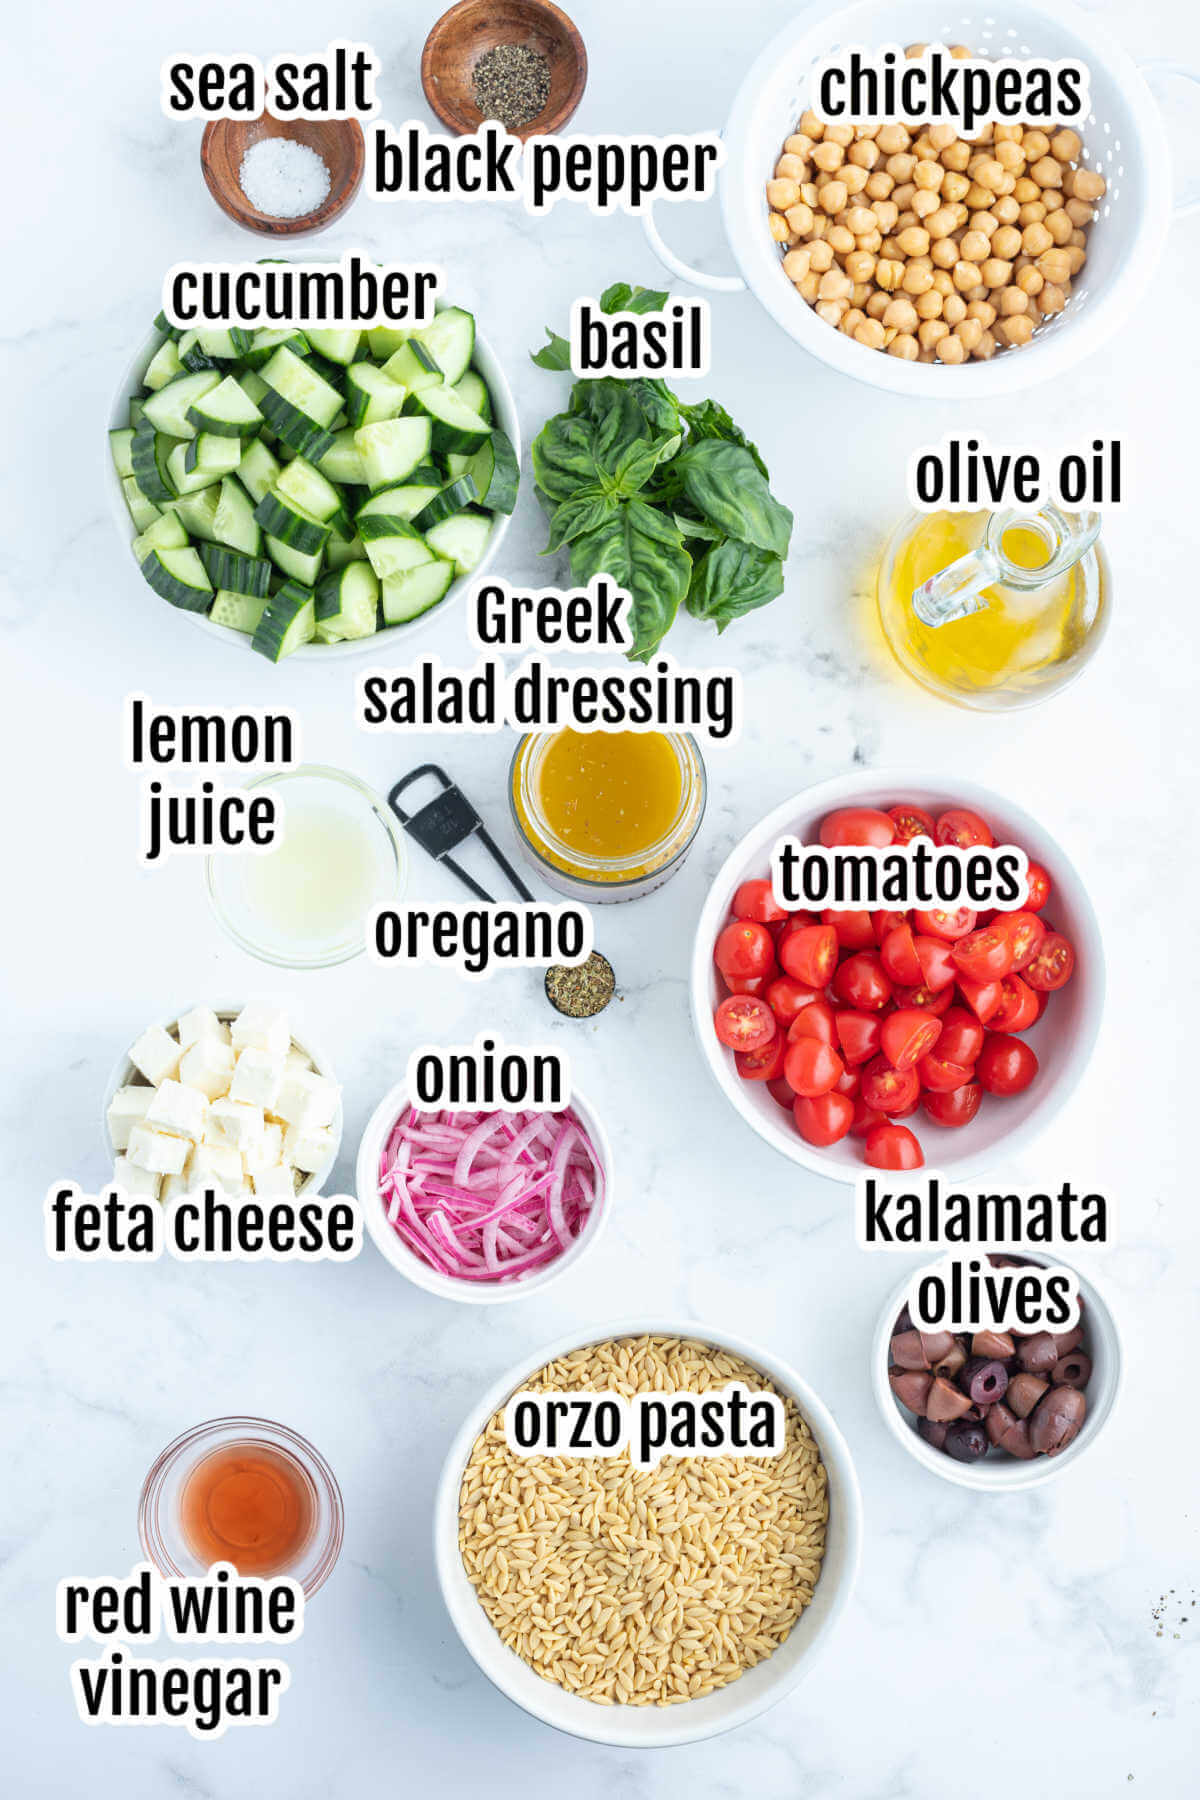 Image of the ingredients needed for making the Greek Orzo Pasta salad. 